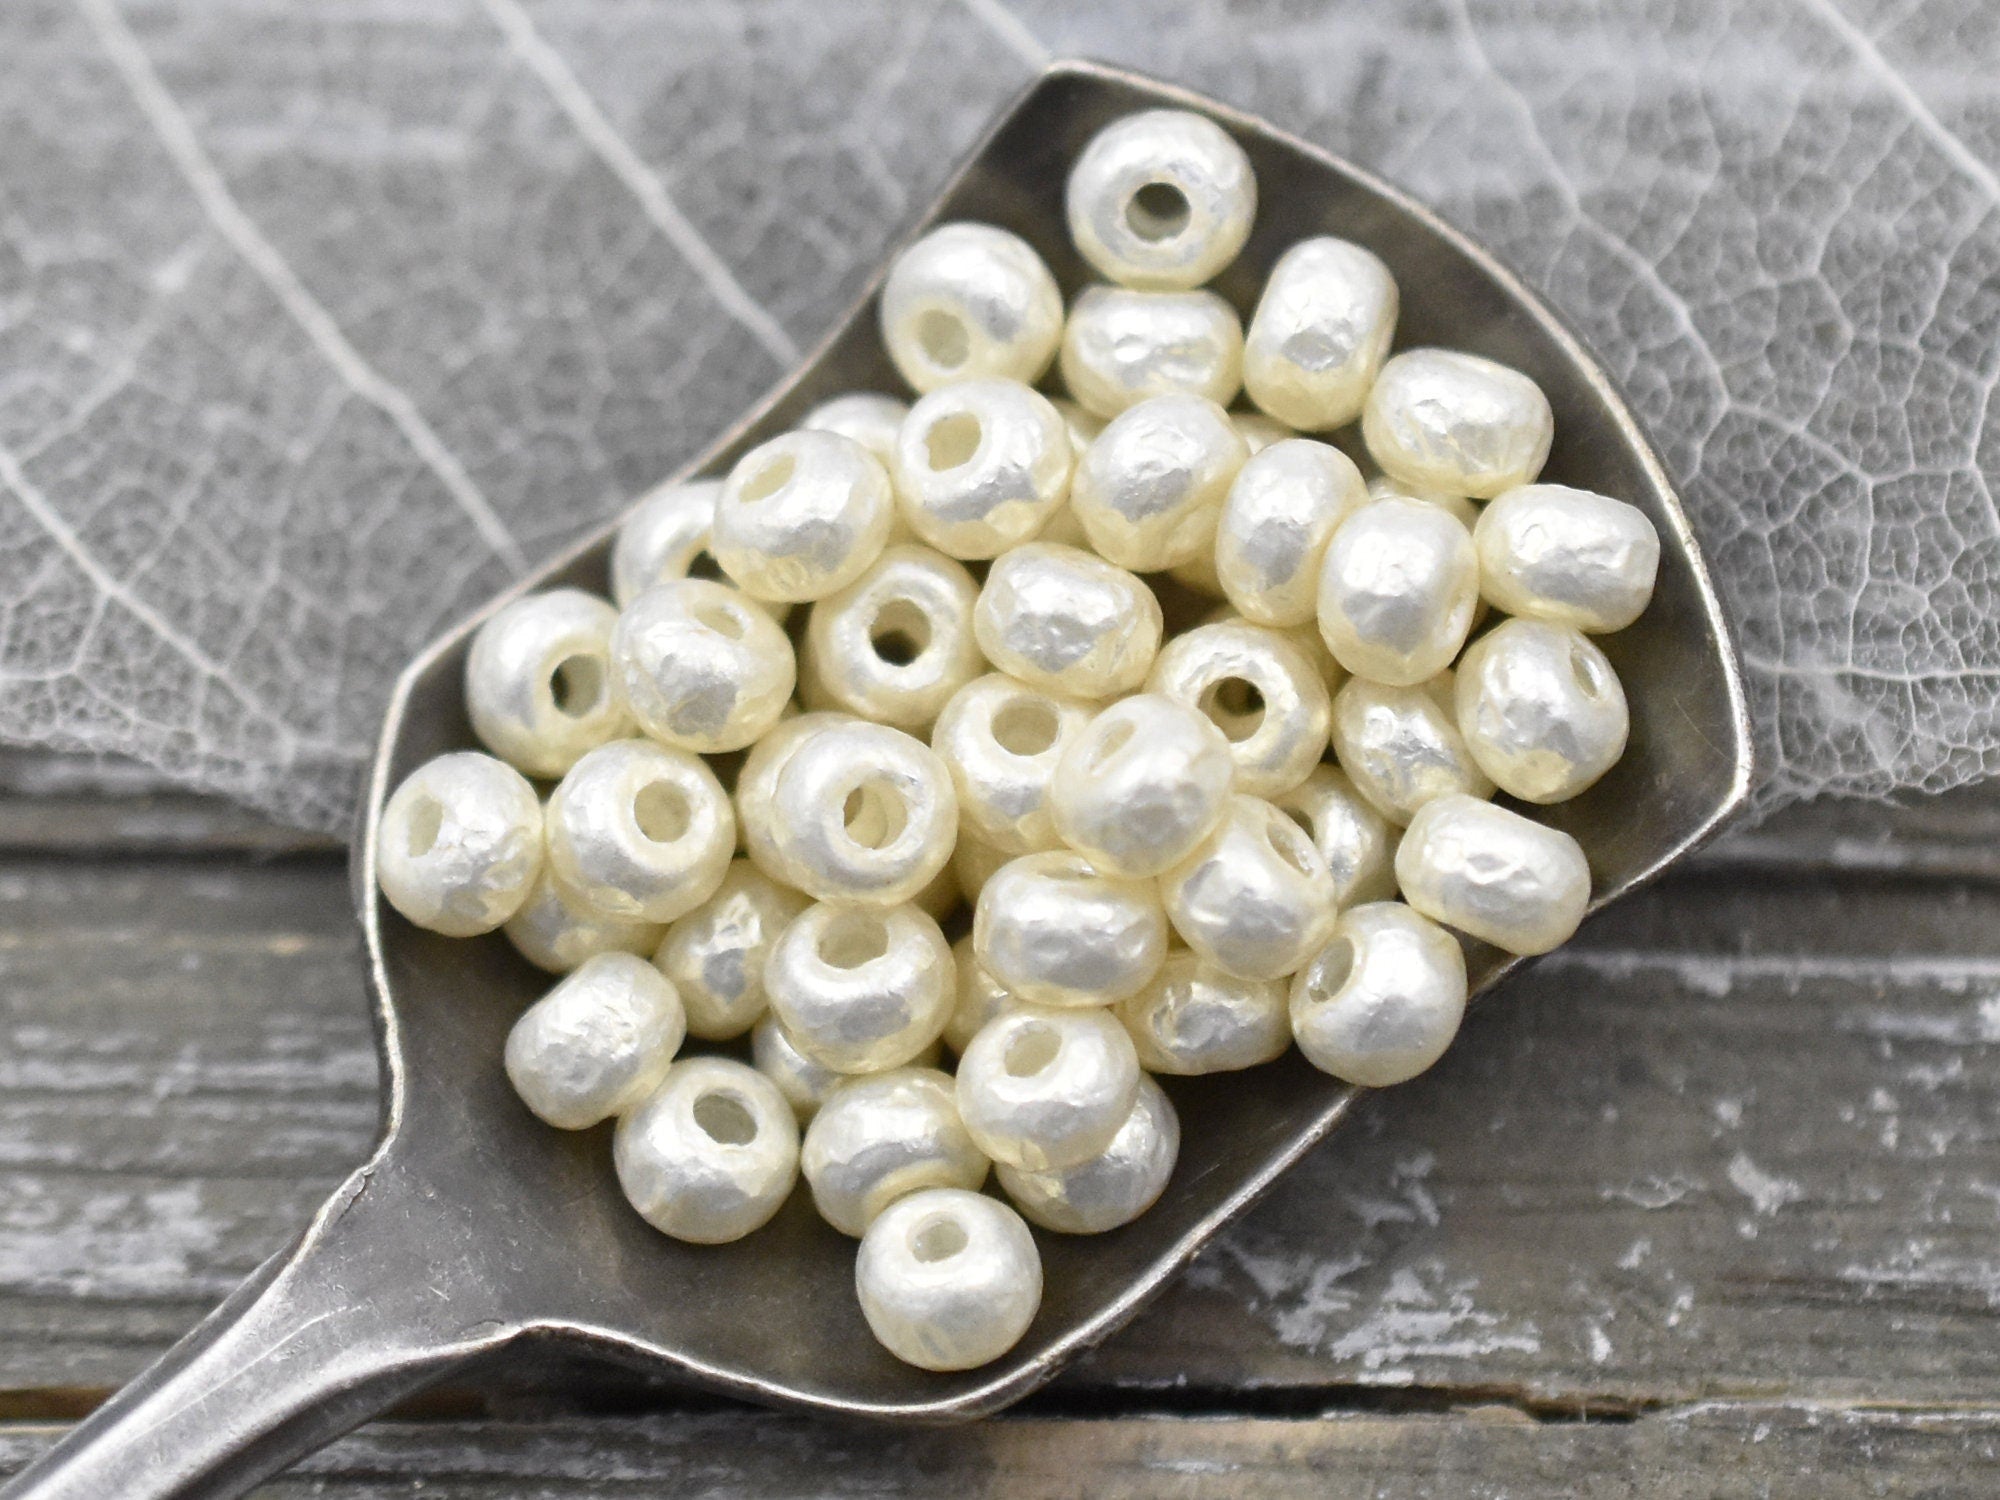 ALEXCRAFT Wholesale 6 Pcs Freshwater Pearls for Jewelry Making Baroque Pearl Charms Small Freshwater Pearls Bulk